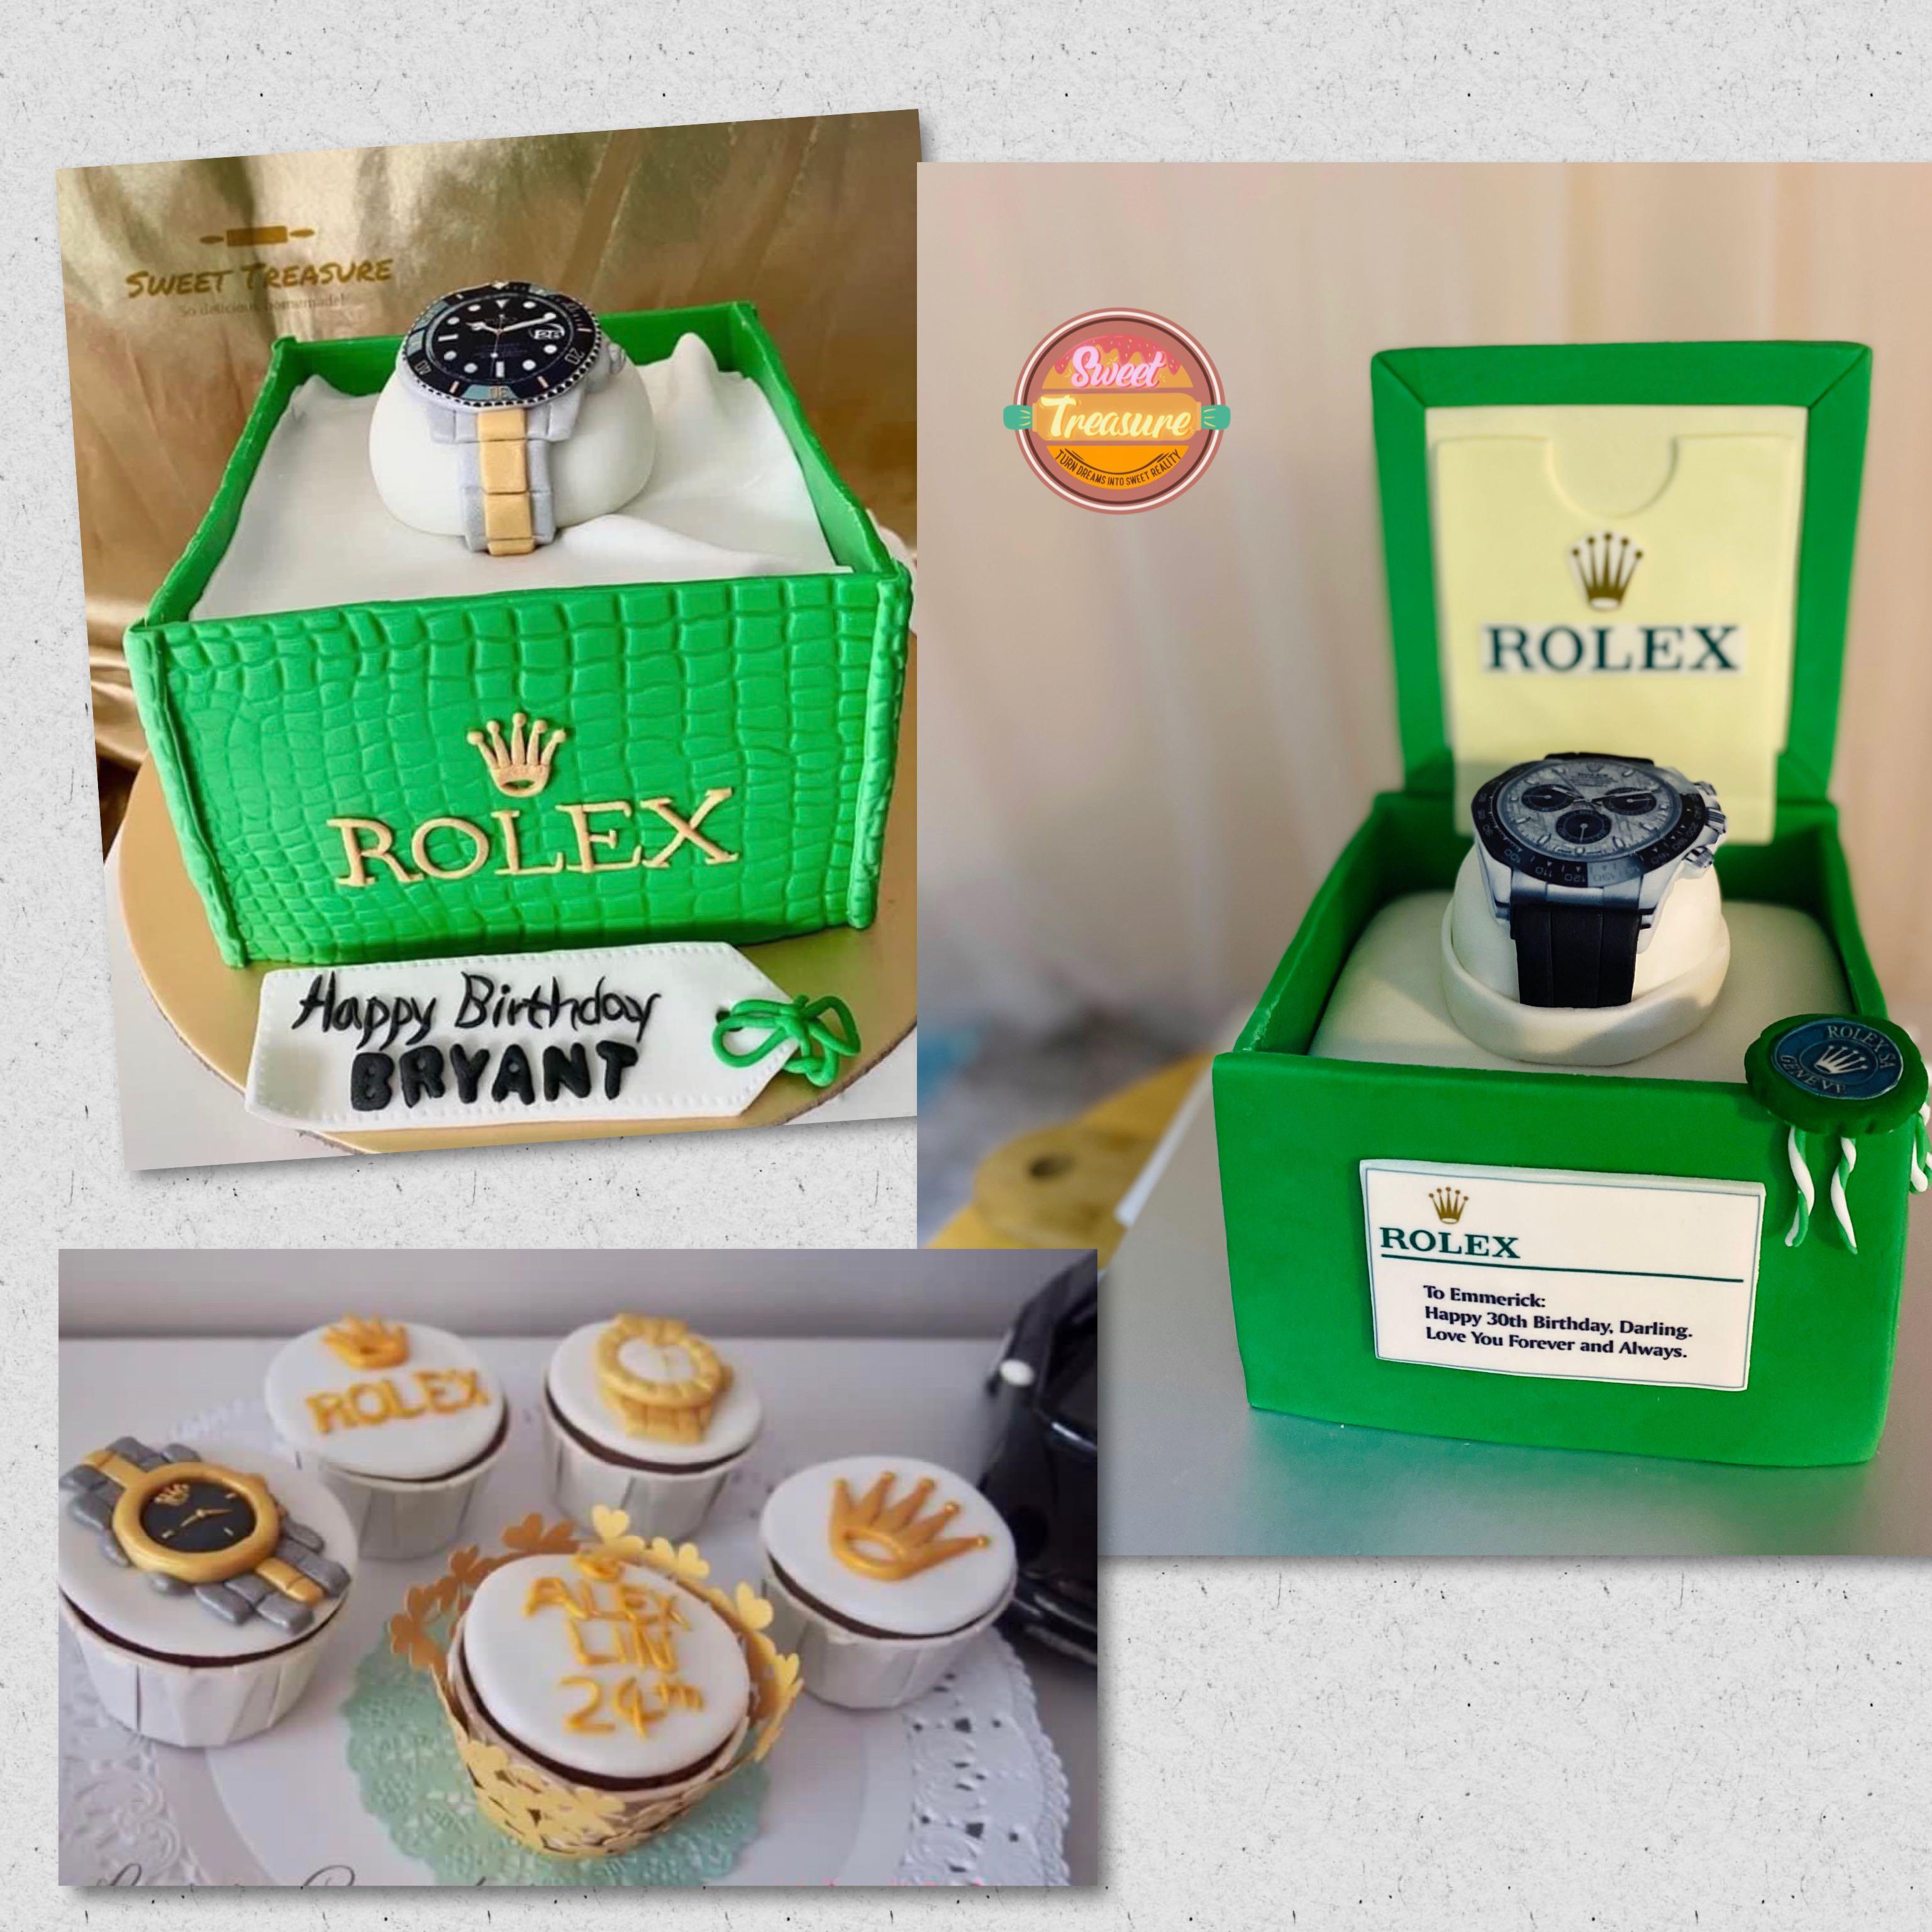 Golden Rolex Oyster Perpetual Cake